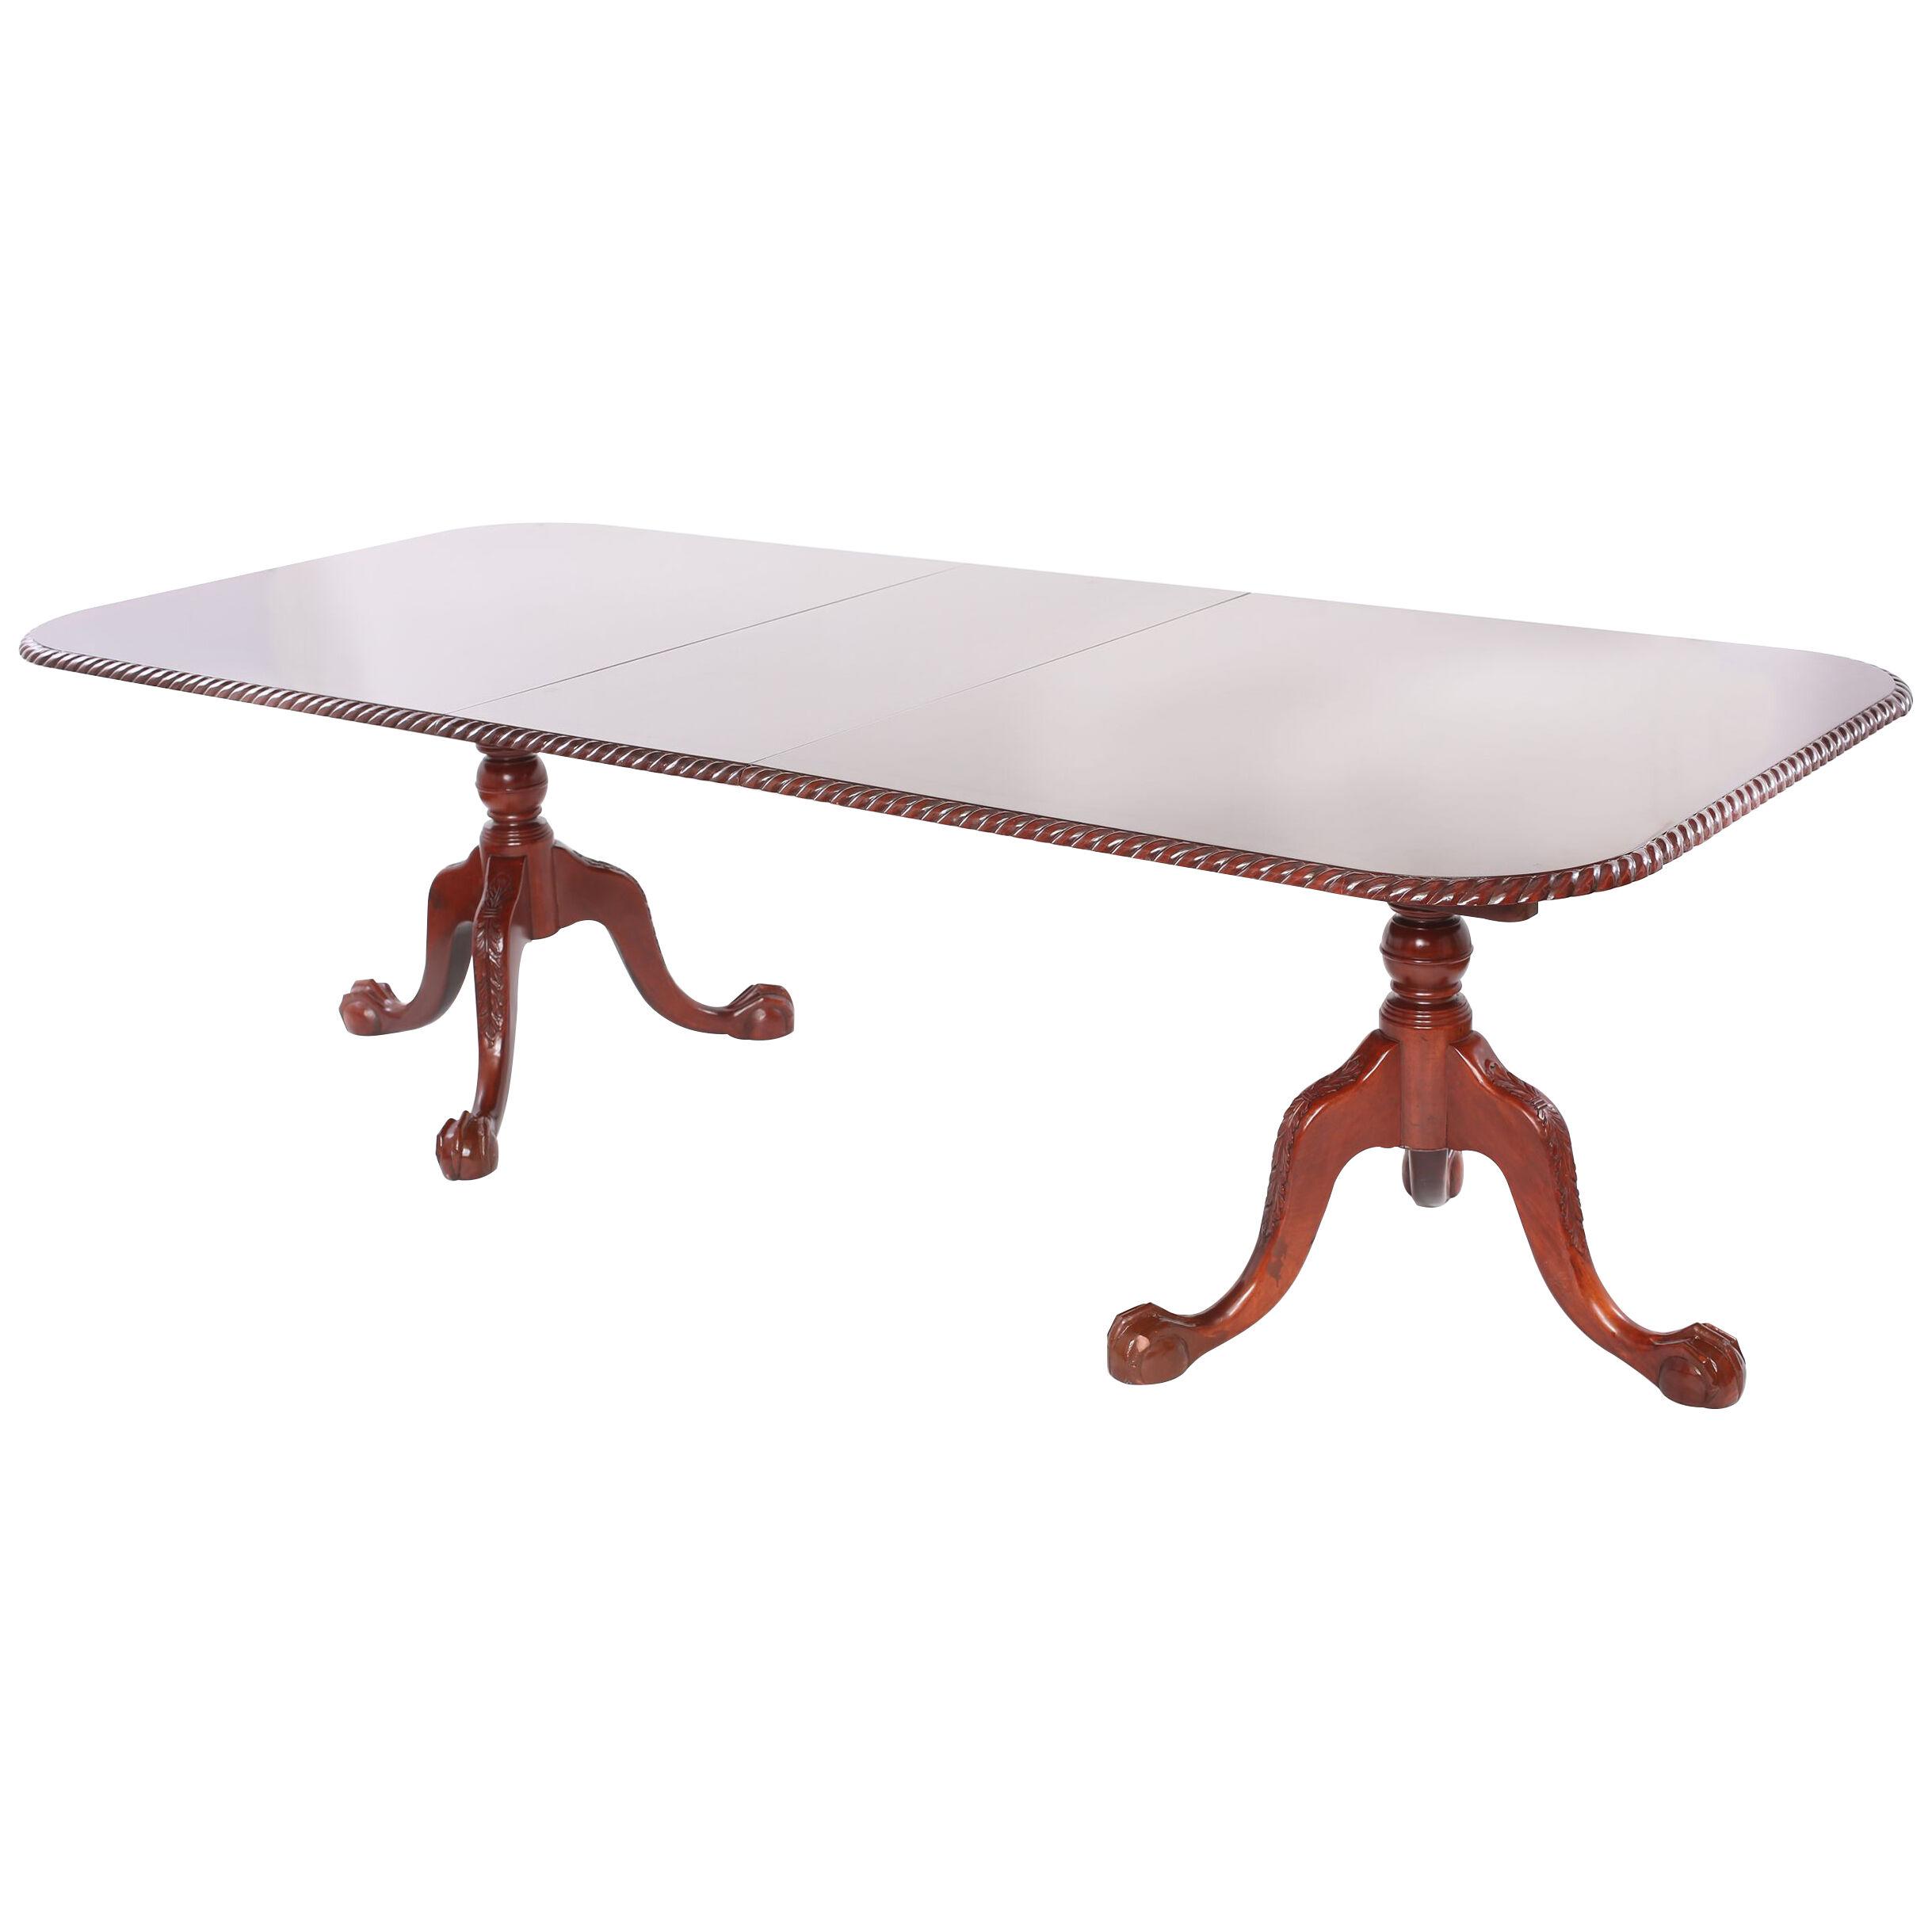 Beautifully Crafted American Centennial Dining Table